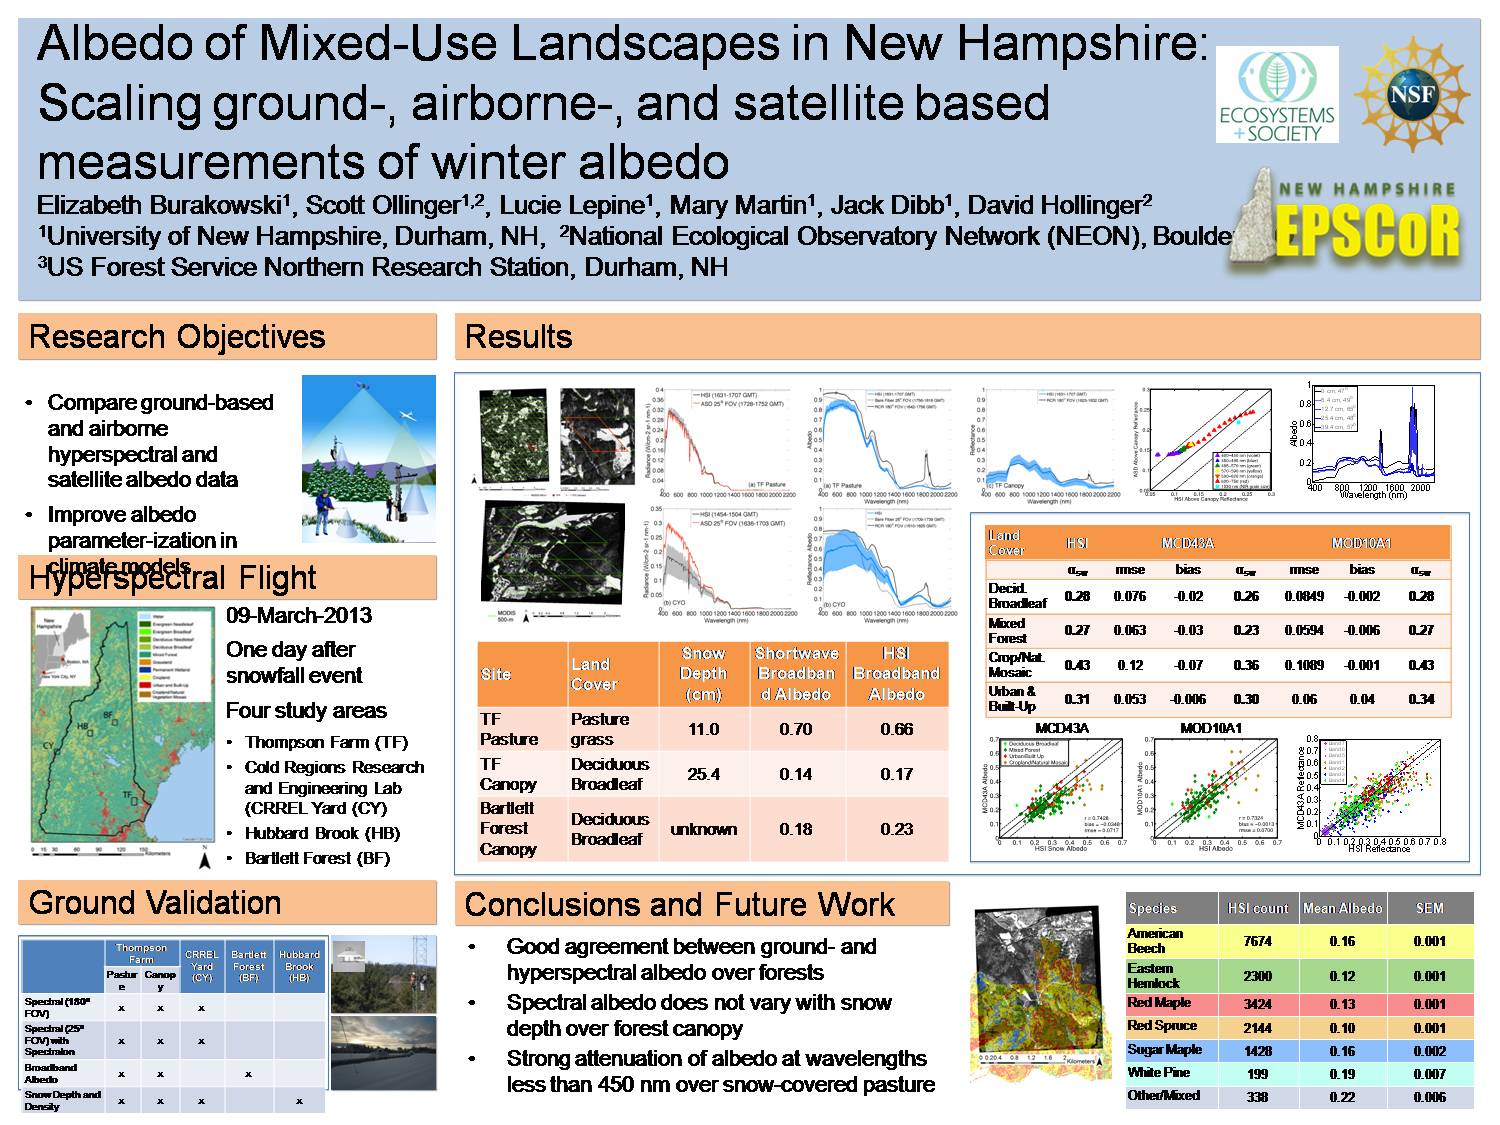 Albedo Of Mixed-Use Landscapes In New Hampshire: Scaling Of Ground-, Airborne, And Satellite Based Measurements Of Winter Albedo by ean2